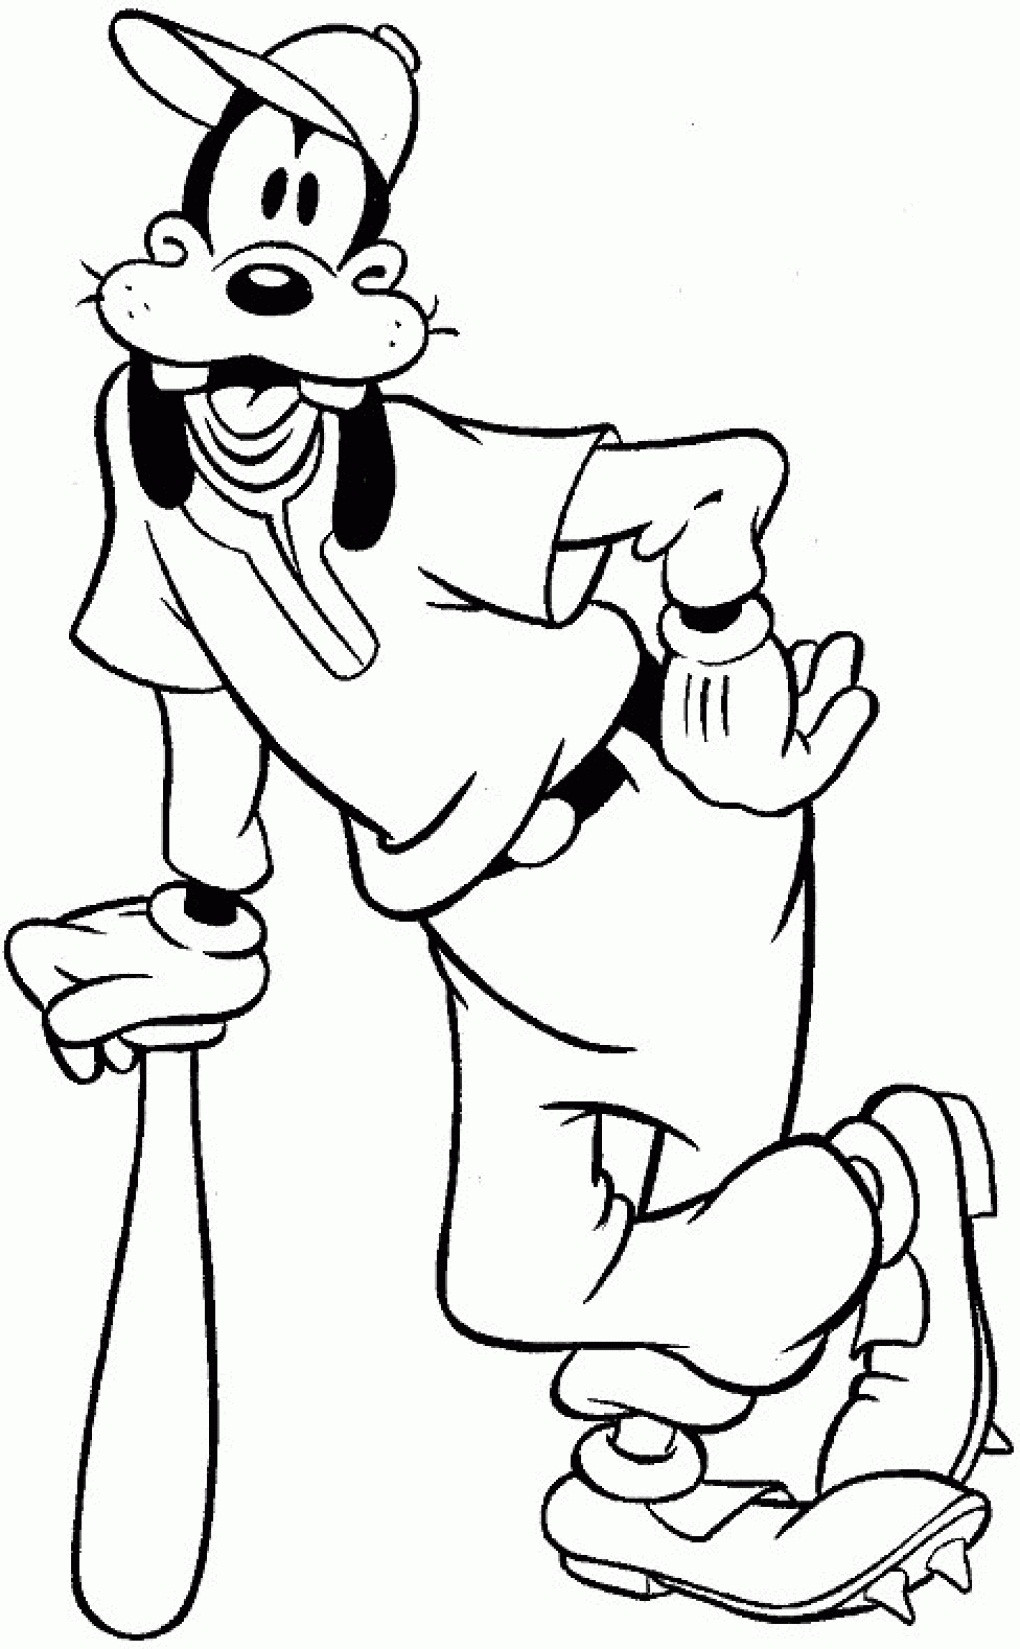 Free Disney Coloring Pages For Kids
 Free Printable Goofy Coloring Pages For Kids